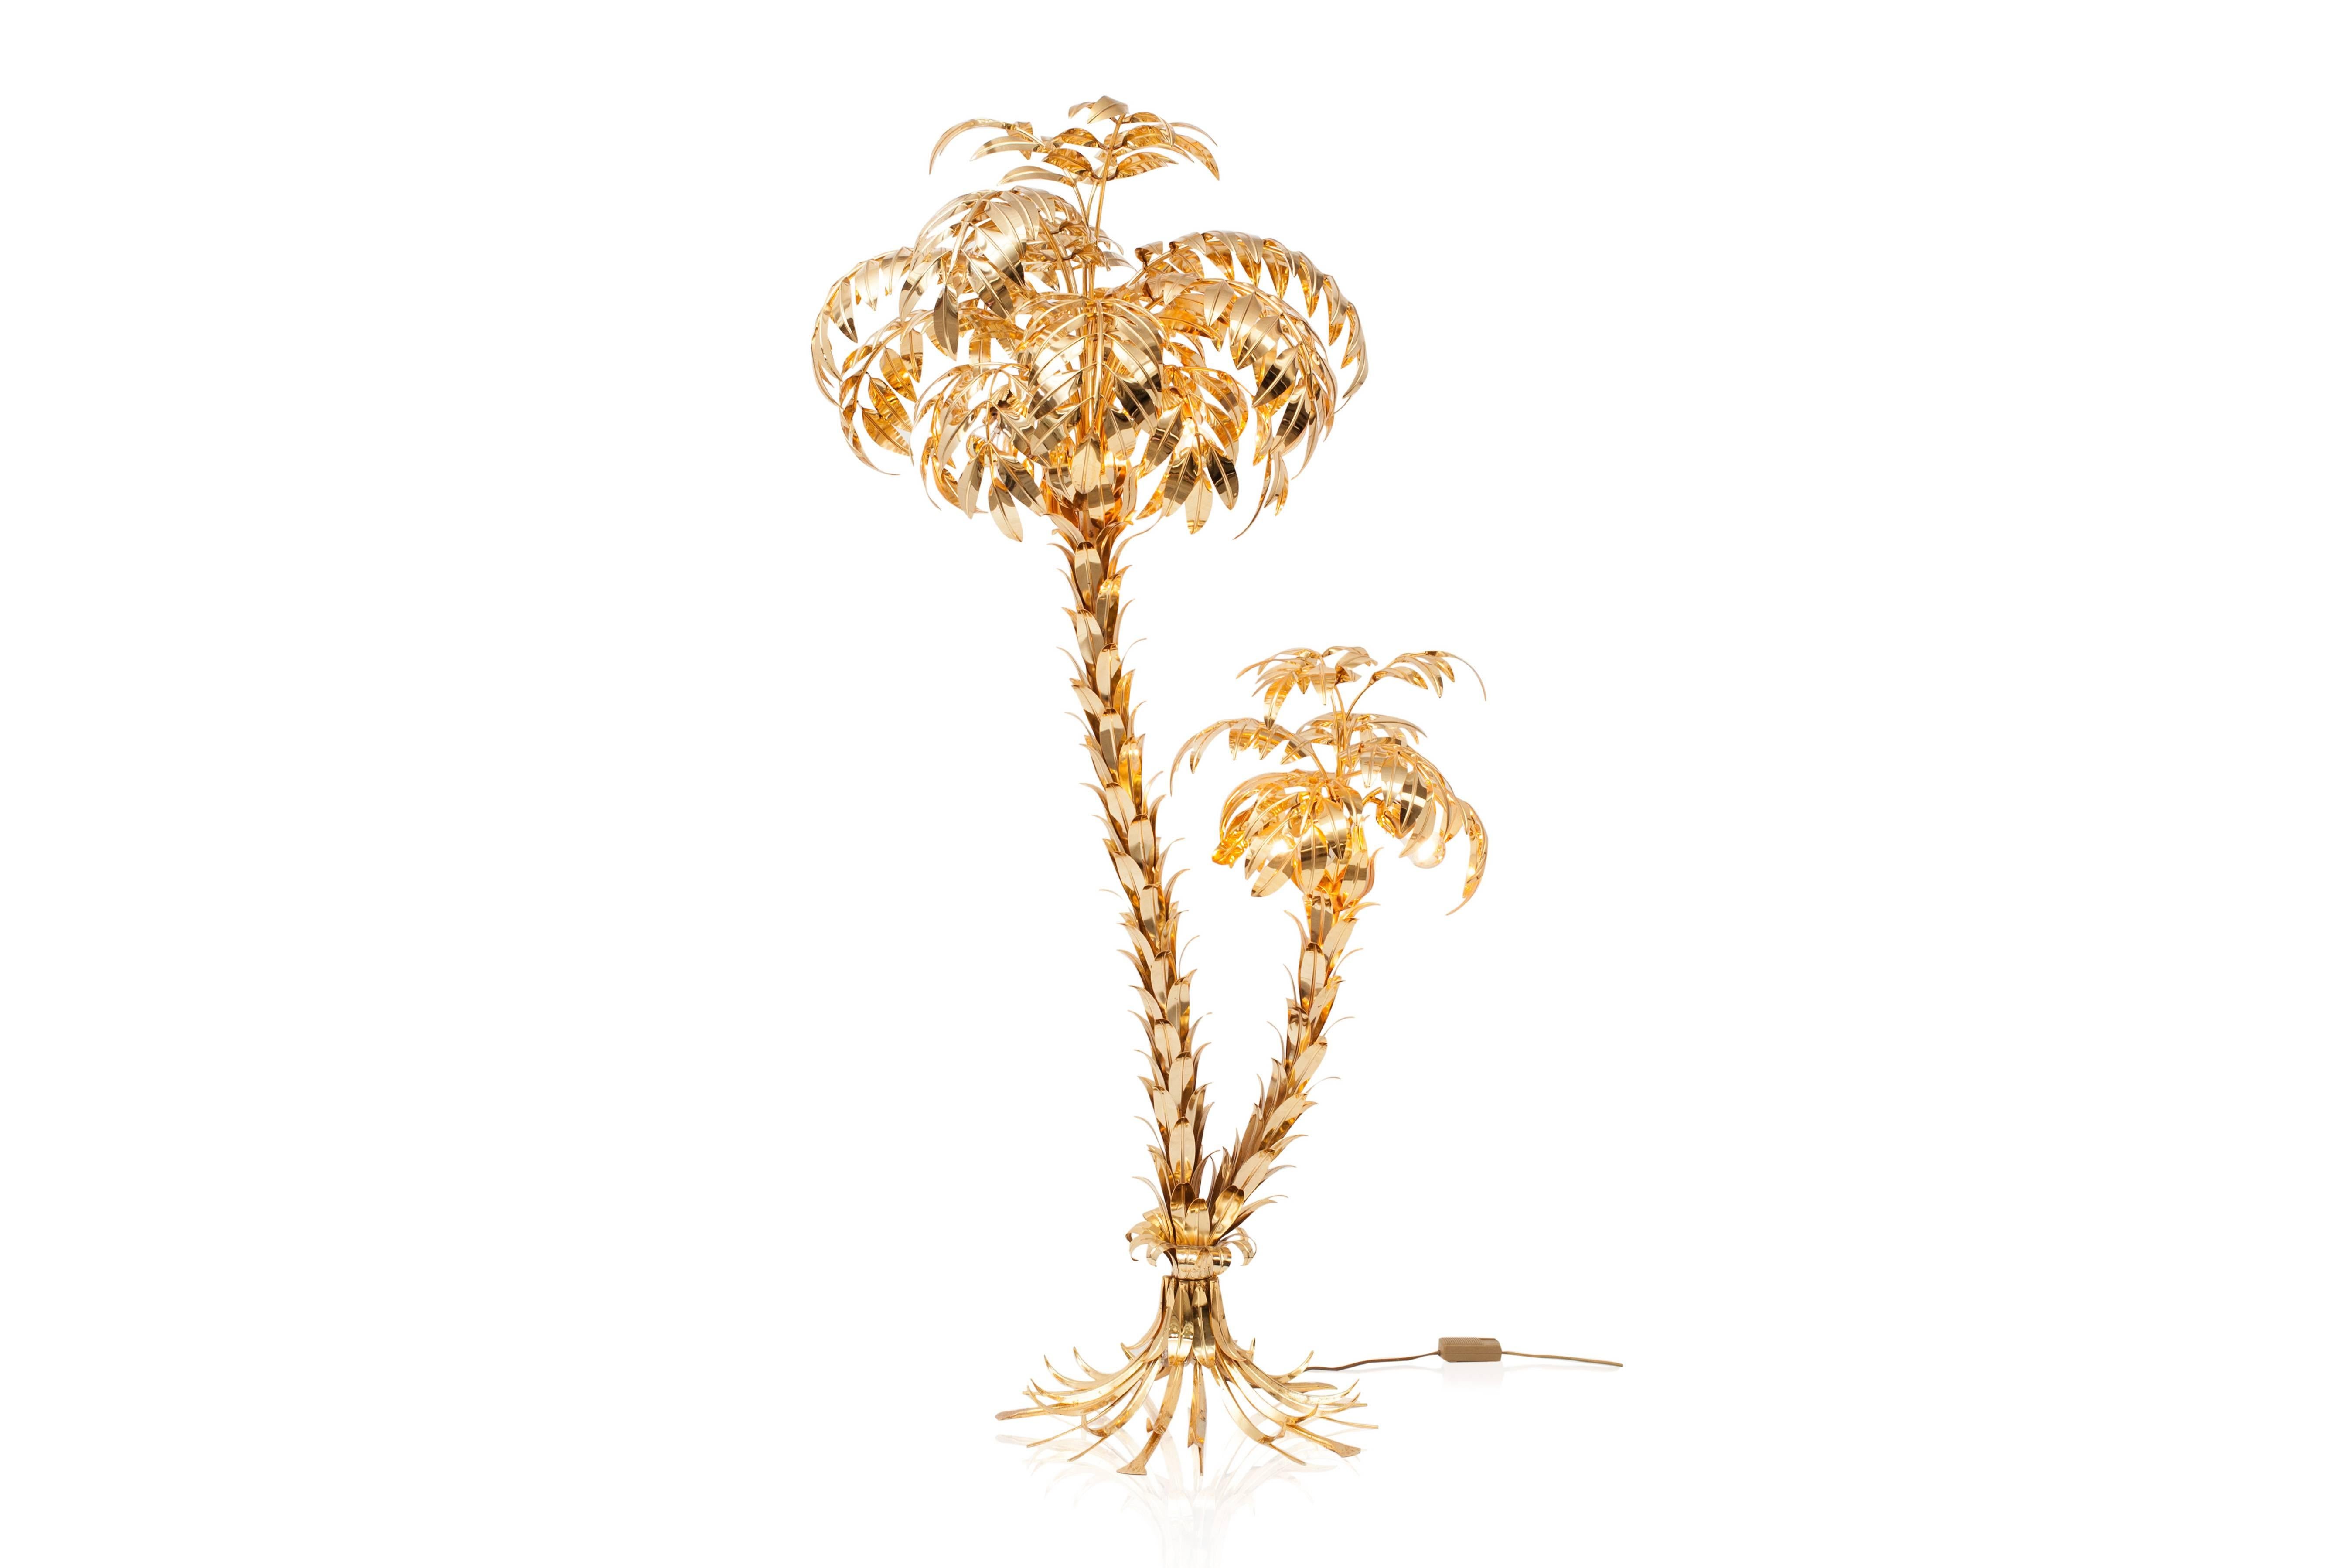 Brass double stem palm tree floor lamp by Hans Koegl
eye-cathing hollywood regency item
this piece is in amazing condition,
Germany, 1970s.
H 190 cm W 100 cm D 80 cm.
   